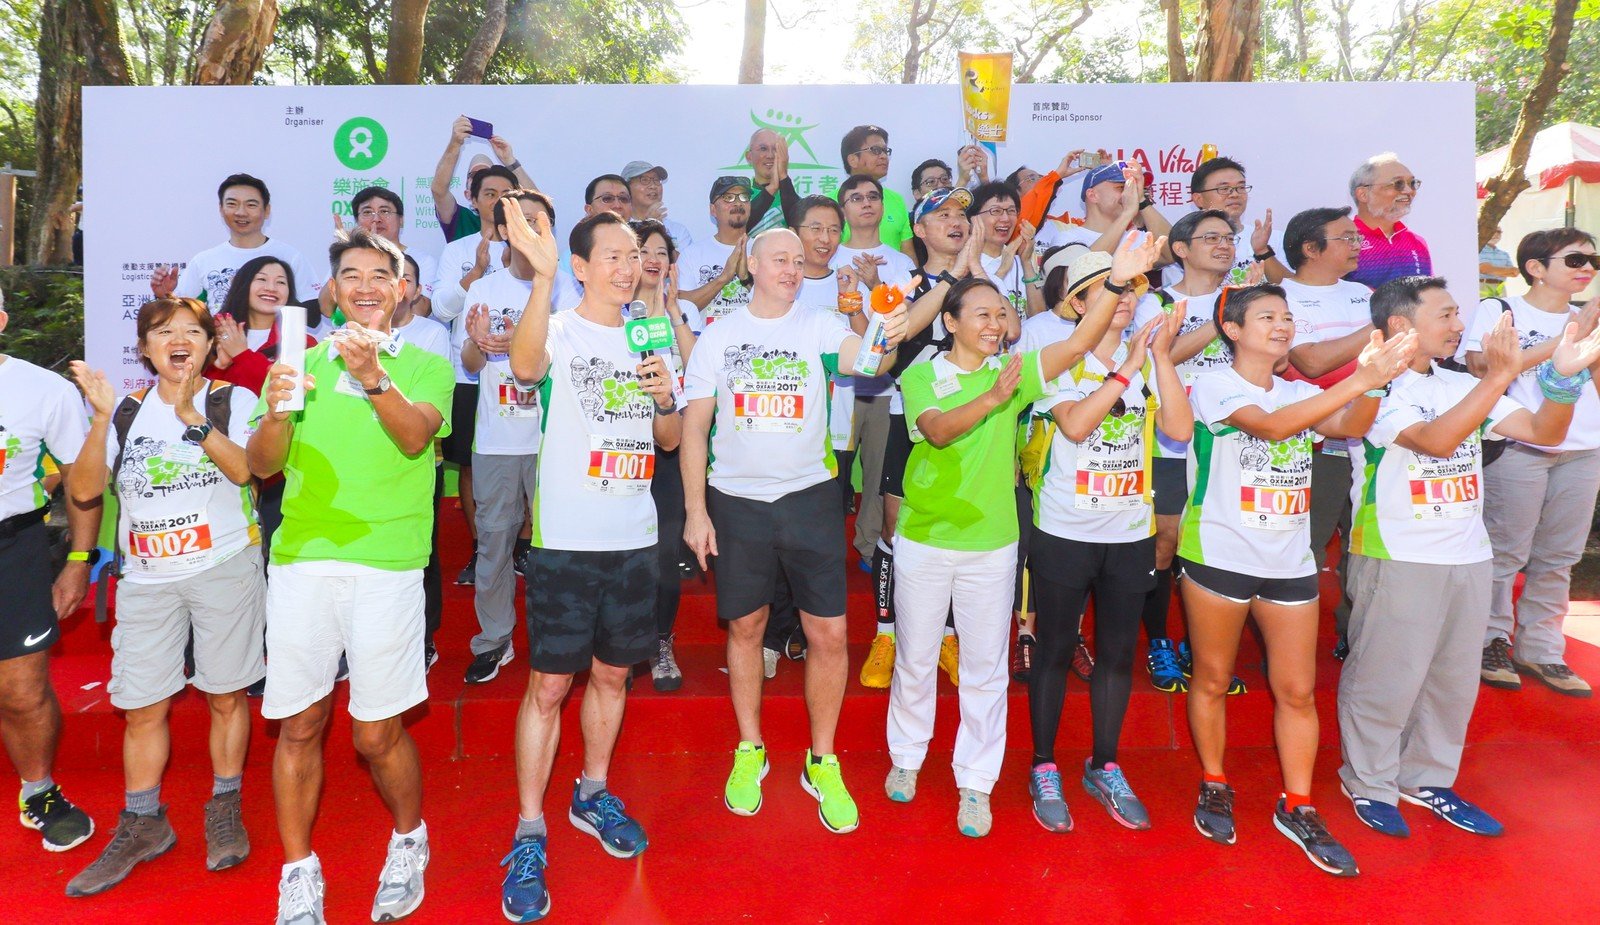 The Oxfam Trailwalker 2017 kick-off ceremony was officiated by Cheung Yuk-Tong, Council Chair of Oxfam Hong Kong (front row second from the left); Bernard Chan, Oxfam Trailwalker Advisory Committee Chair (front row third from the left); Peter Crewe, Chief Executive Officer, AIA Hong Kong & Macau (front row fourth from the left); and Trini Leung, Director General of Oxfam Hong Kong (front row fifth from the left). AIA Vitality is the Principal Sponsor of Oxfam Trailwalker 2017.